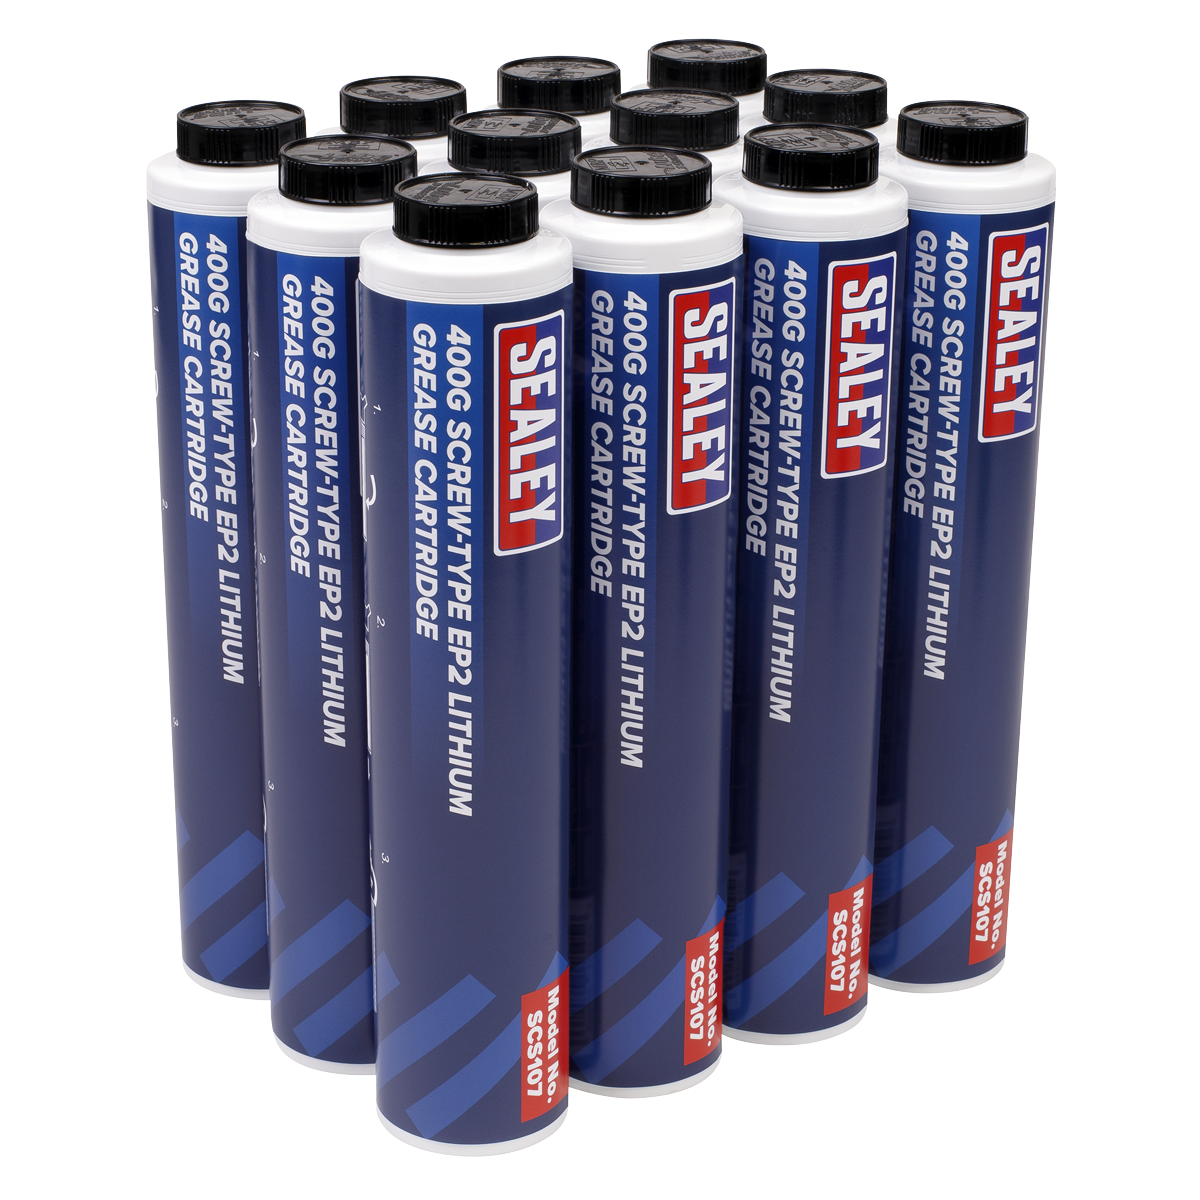 Screw-Type EP2 Lithium Grease Cartridge 400g Pack of 12 - SCS108 - Farming Parts